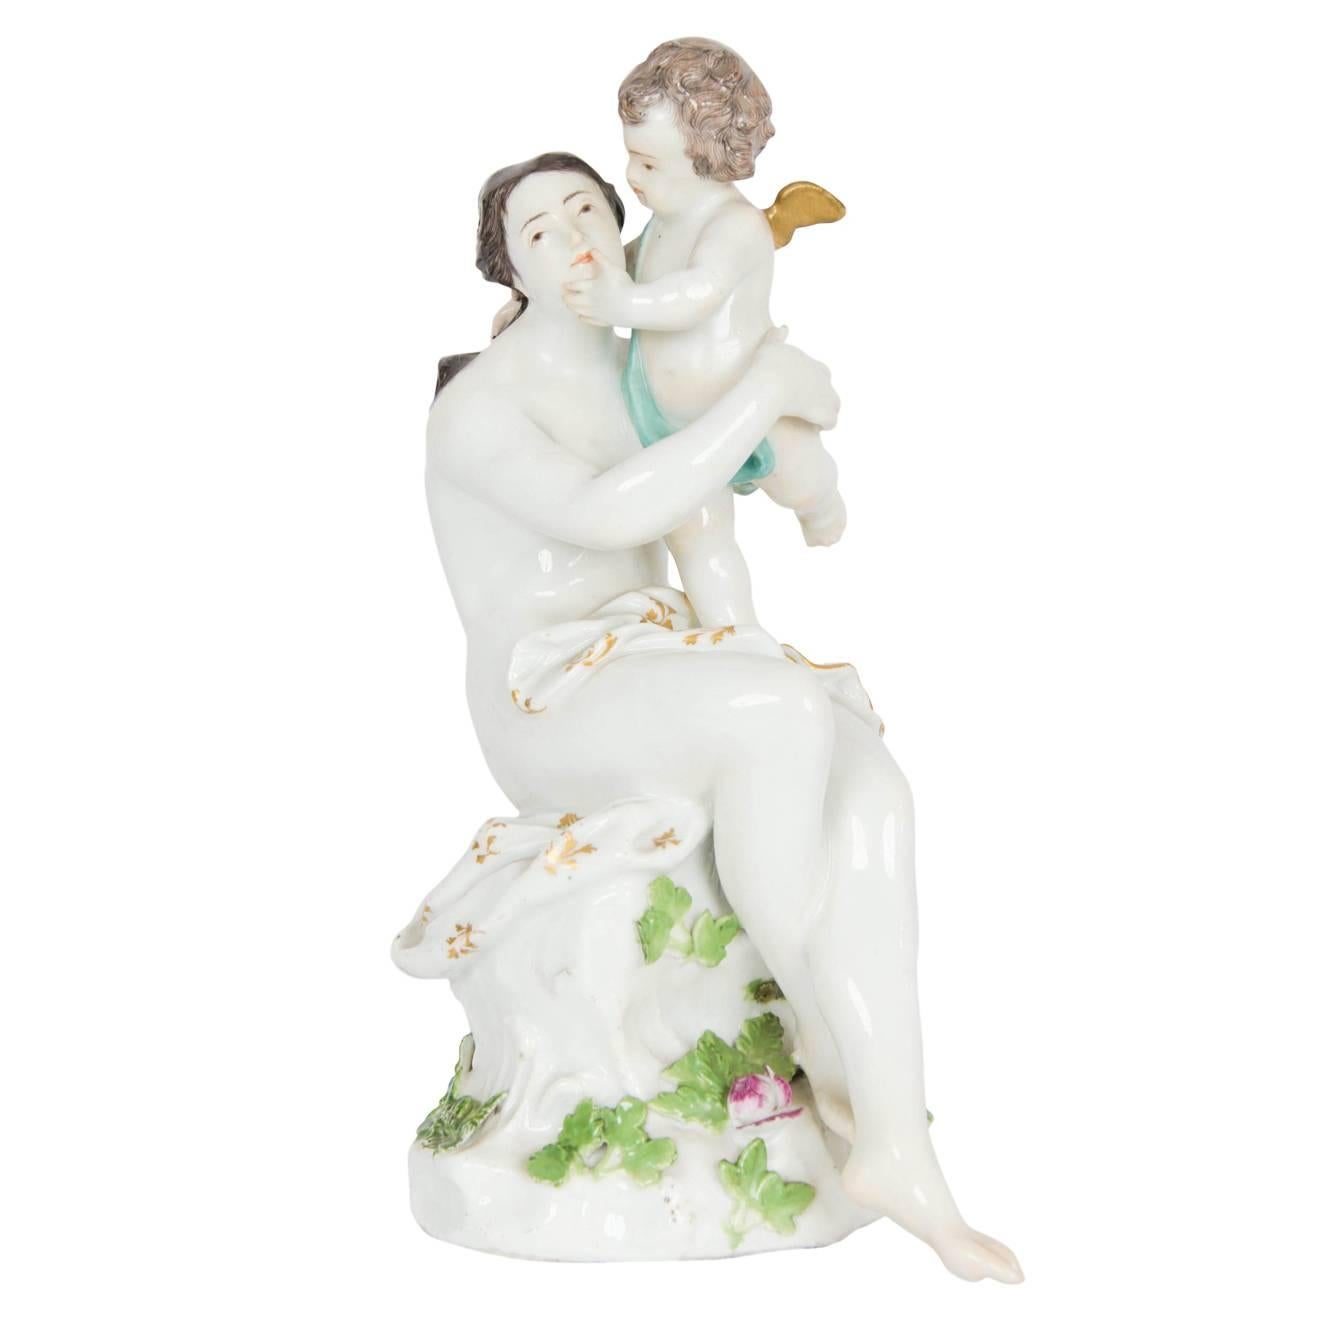 Antique German porcelain group of Venus with Cupid by Meissen
German, c. 1750
Height 20.5cm, width 11cm, depth 12cm

This charming Meissen porcelain figure depicts Venus and Cupid. The duo is presented in a format that brings to minds depictions of